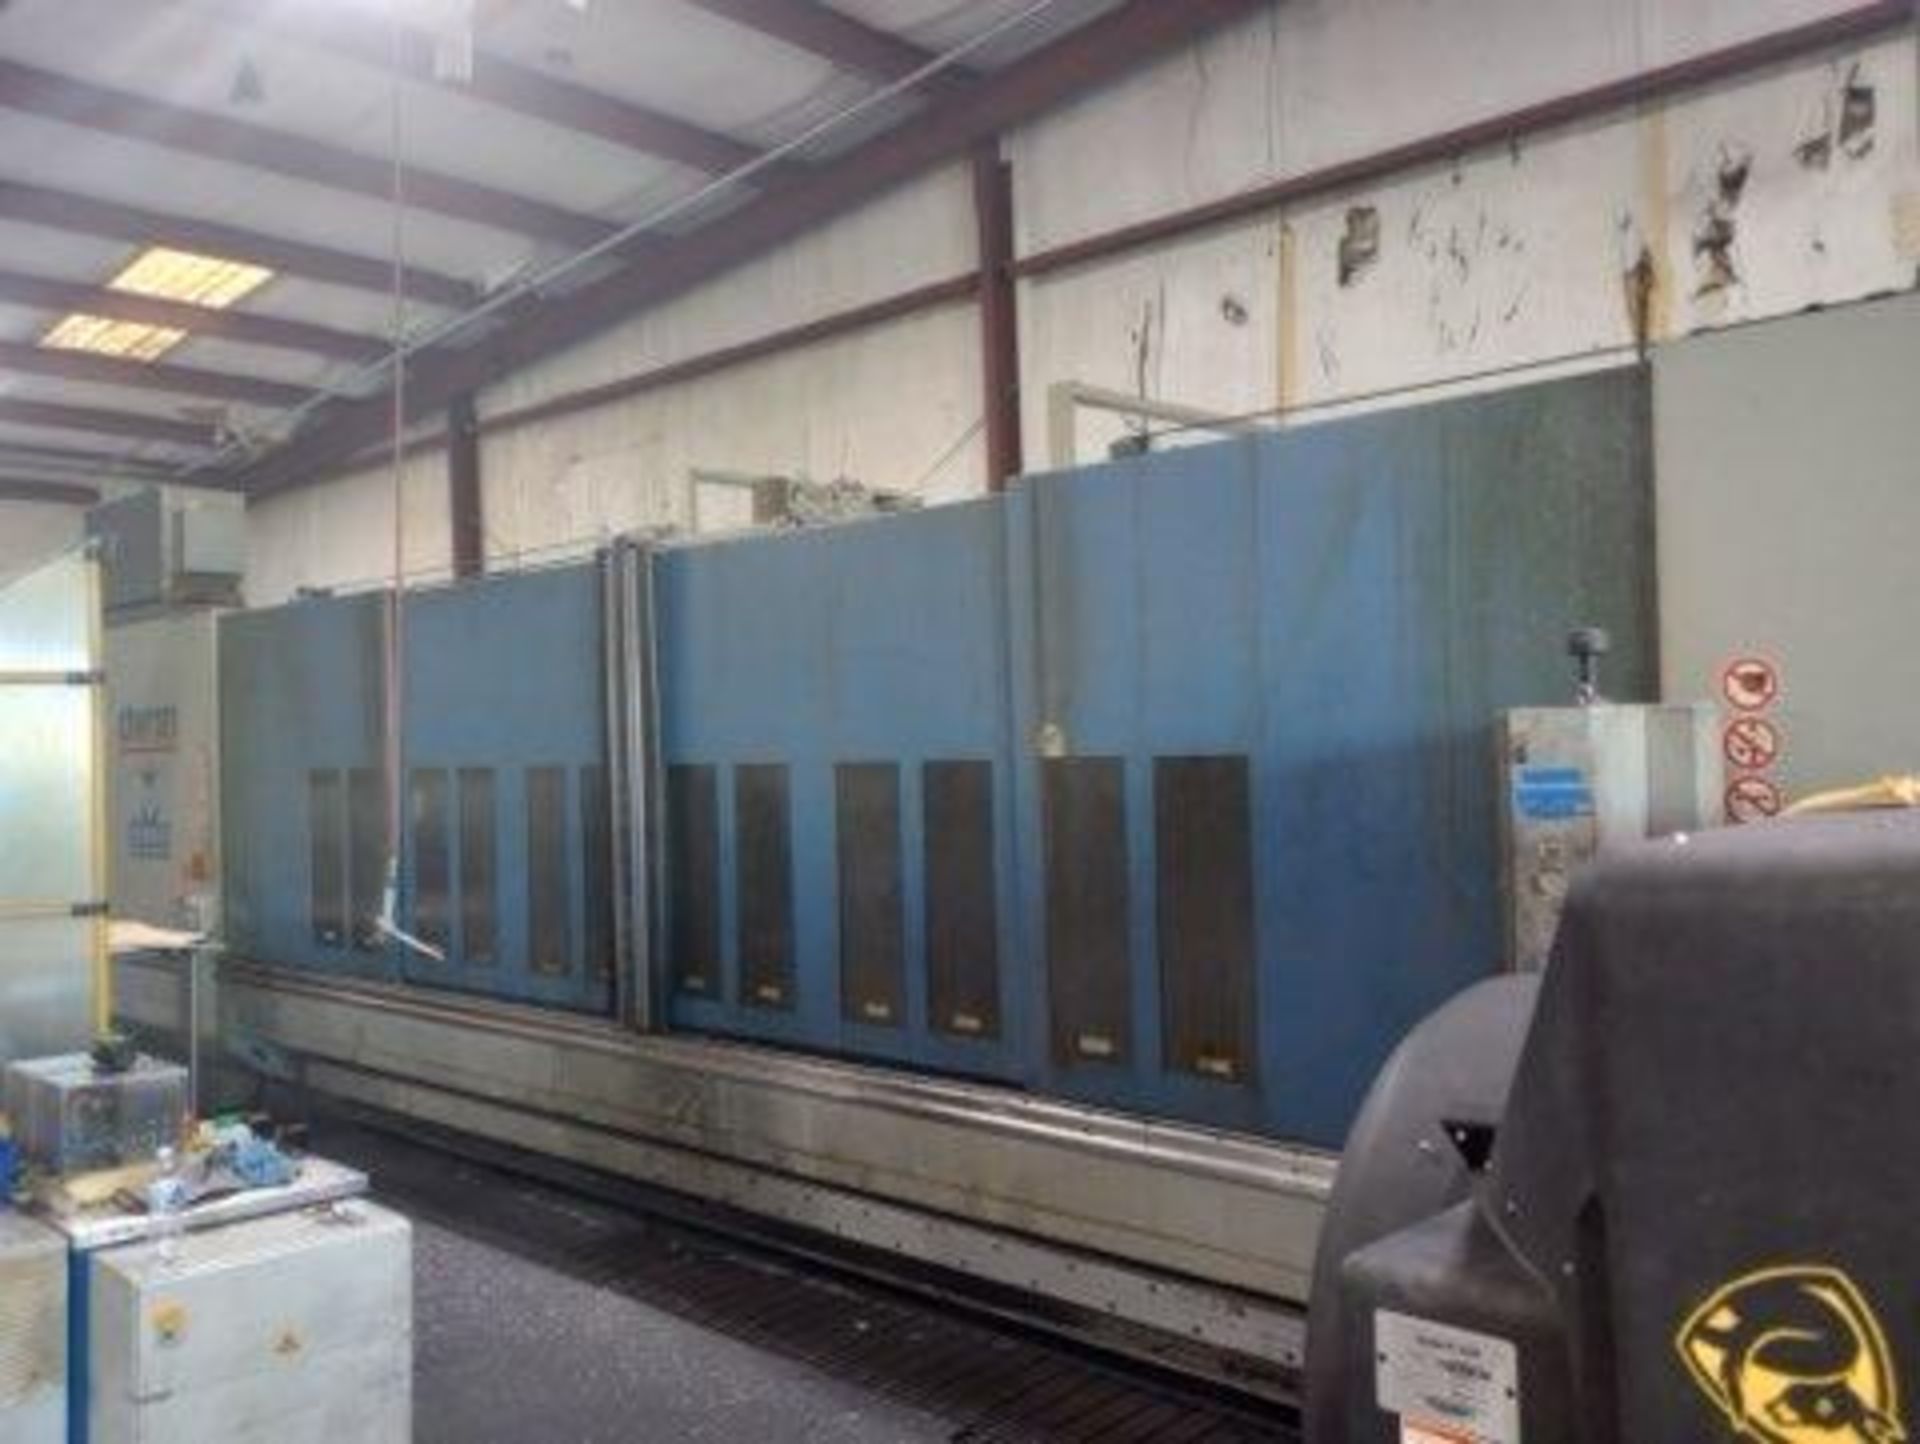 2011 CHIRON M6000 CNC VMC - 4TH AXIS & CHIP CONVEYOR INCLUDED - Image 2 of 16